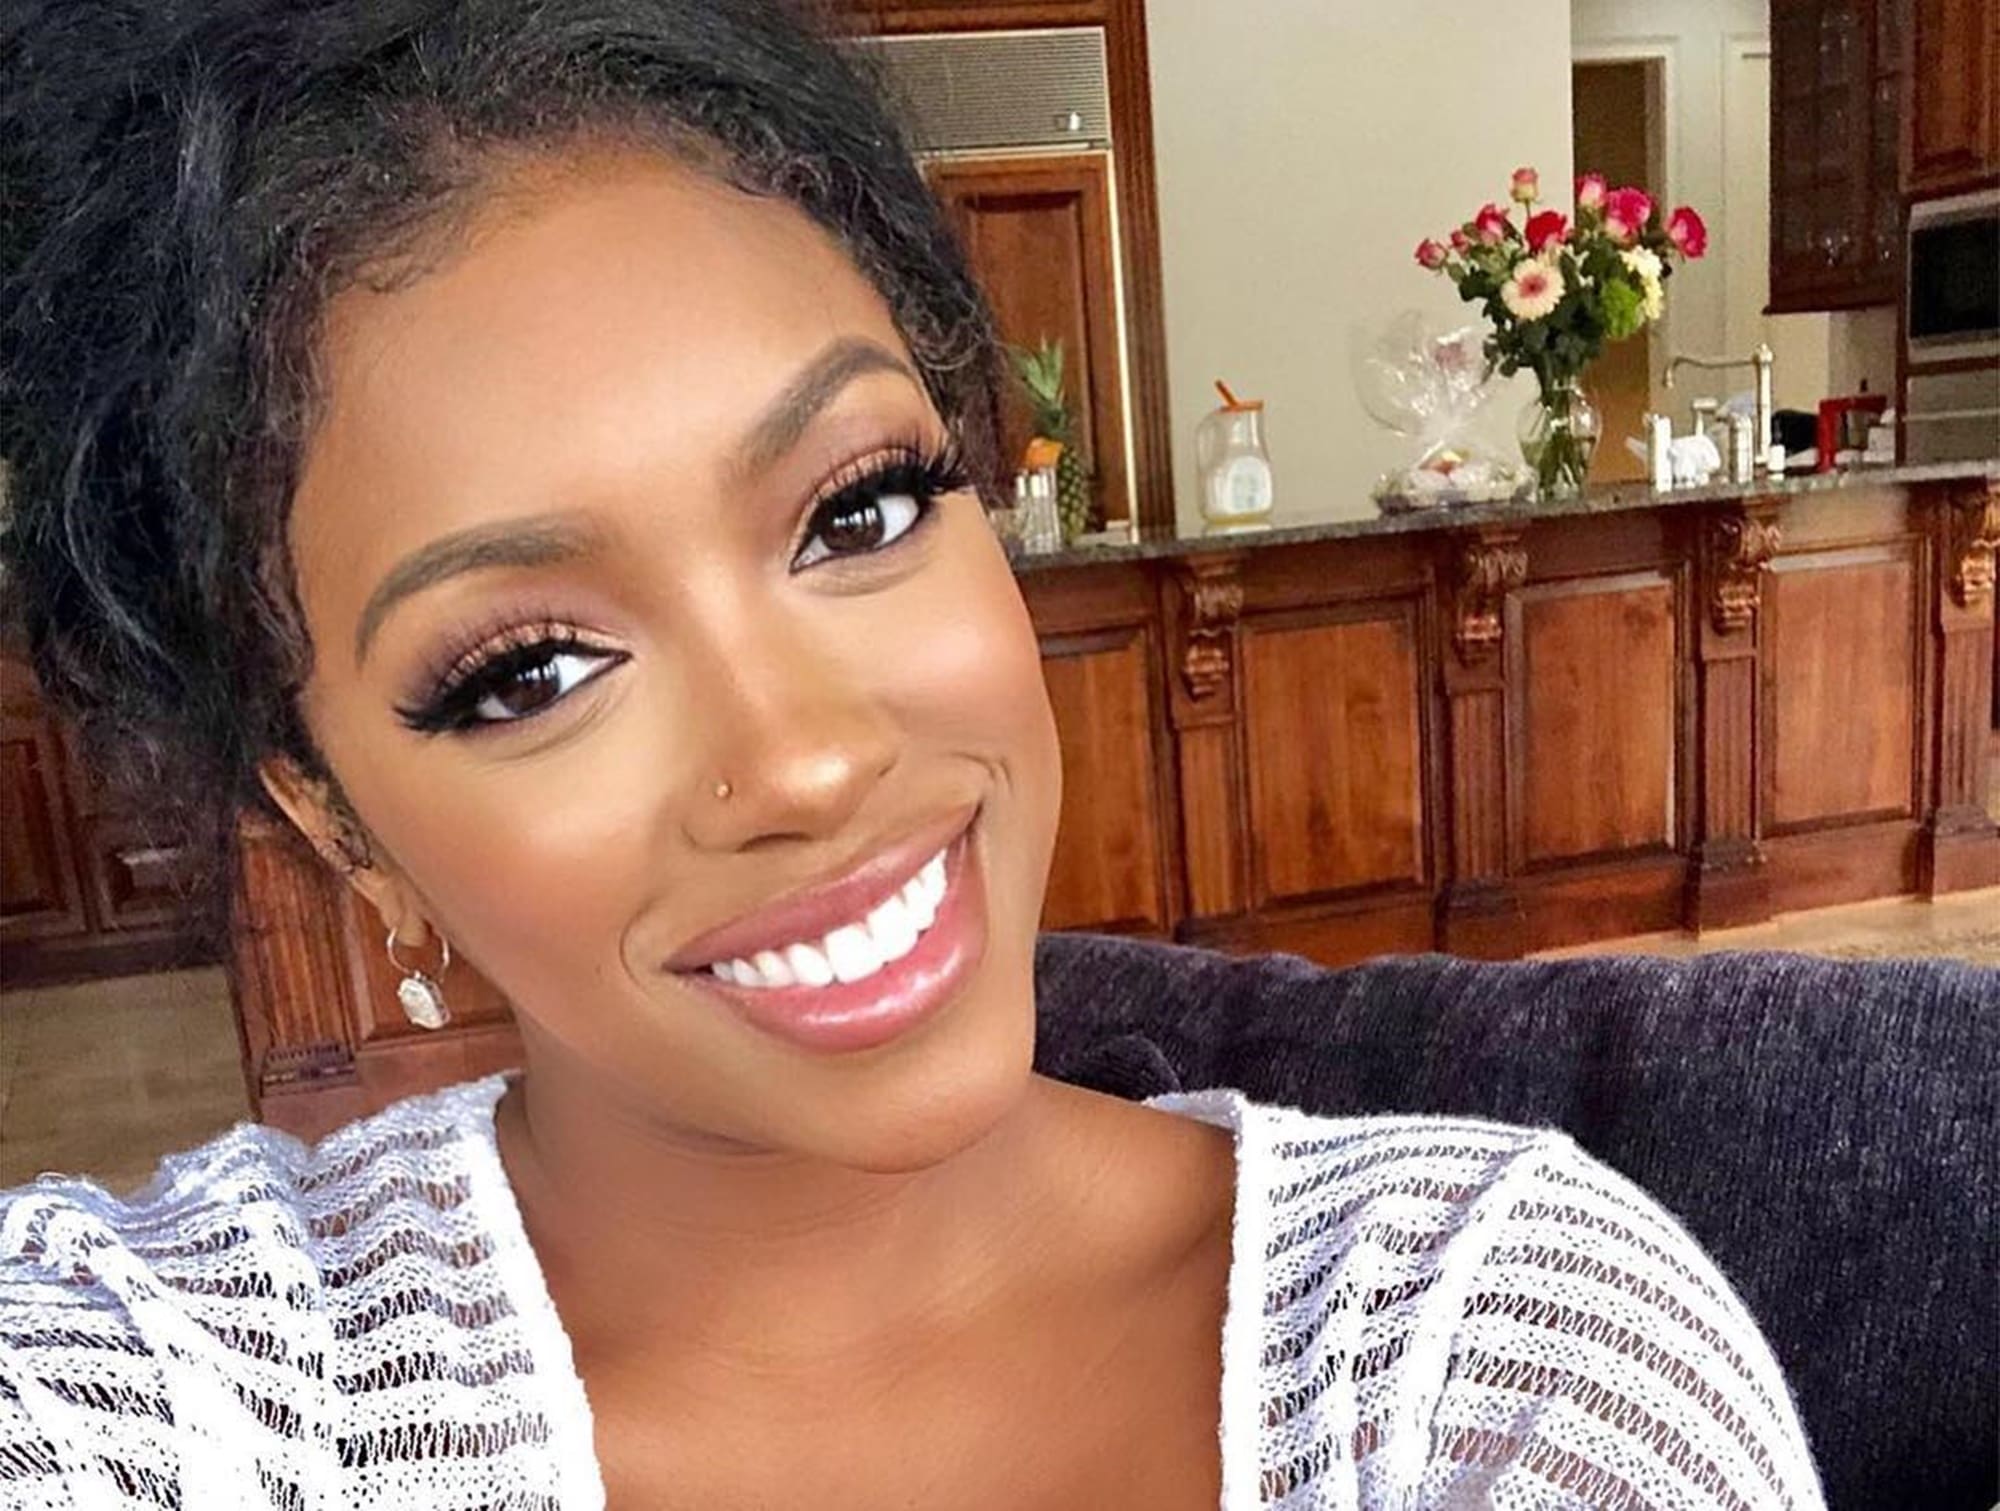 Porsha Williams Melts Fans' Hearts With Some Custom-Made Clothes For Baby Pilar Jhena - Watch Her Video - People Are Asking For The Baby's Face Reveal